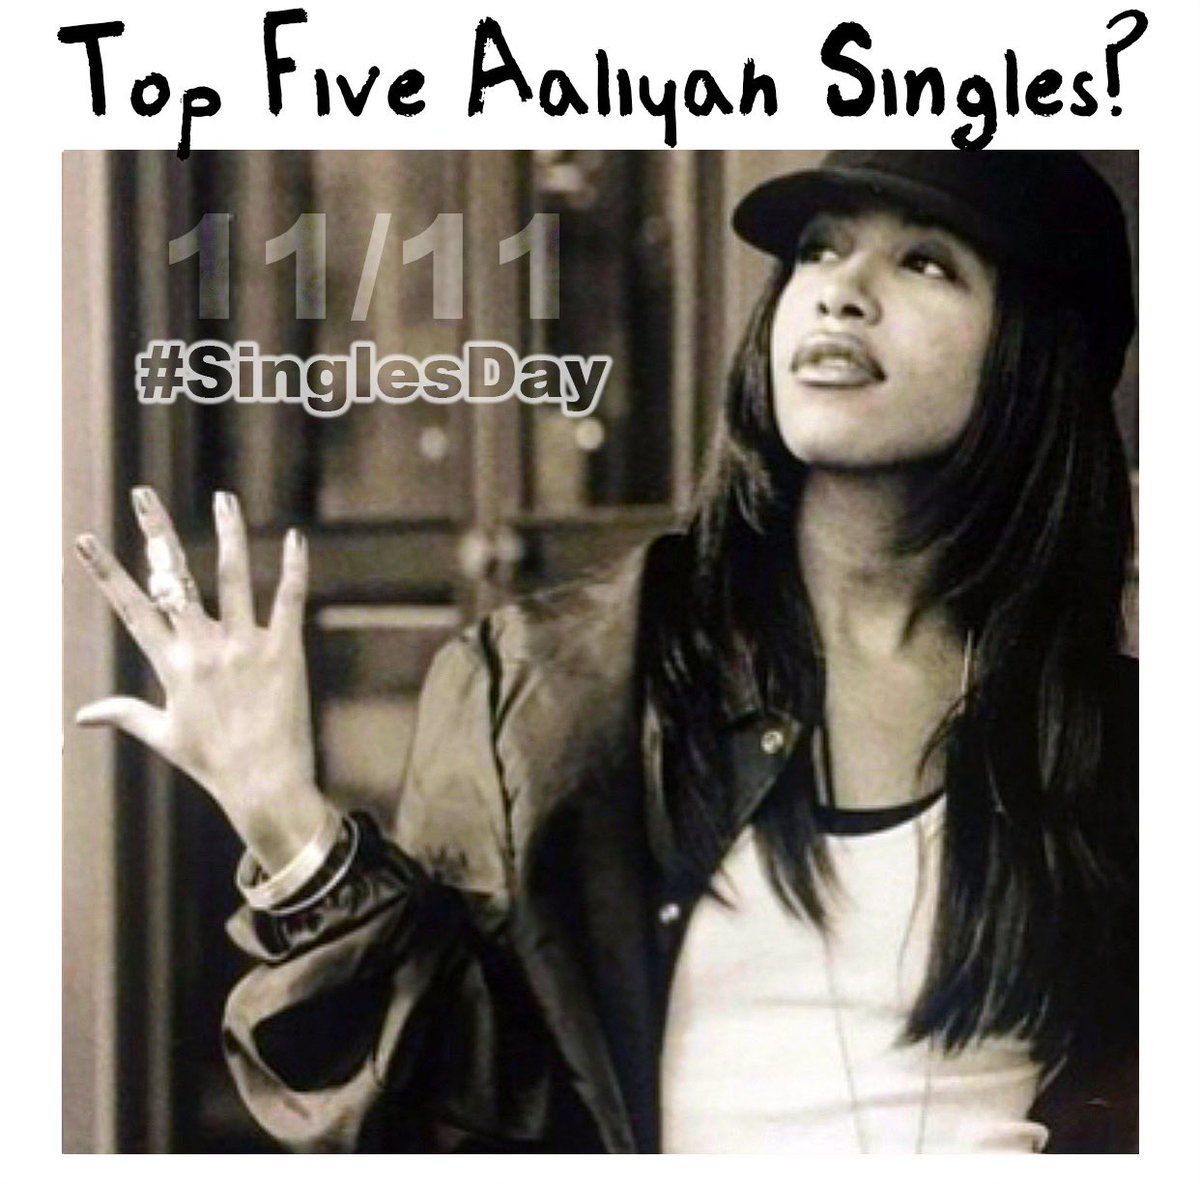 /.\ It’s #SinglesDay :  Time 2 be a choosey lover & tell us your “Top 5 Aaliyah Singles” in a tweet ! 🎤💬💋

📸: Photo of Aaliyah by Ssirus W.
Pakza. Aaliyah in Munich in 1996, in front of Hotel 'Vier Jahreszeiten.” 

@RAD_6 @aaliyah #Aaliyah #top5 #90sMusic #music